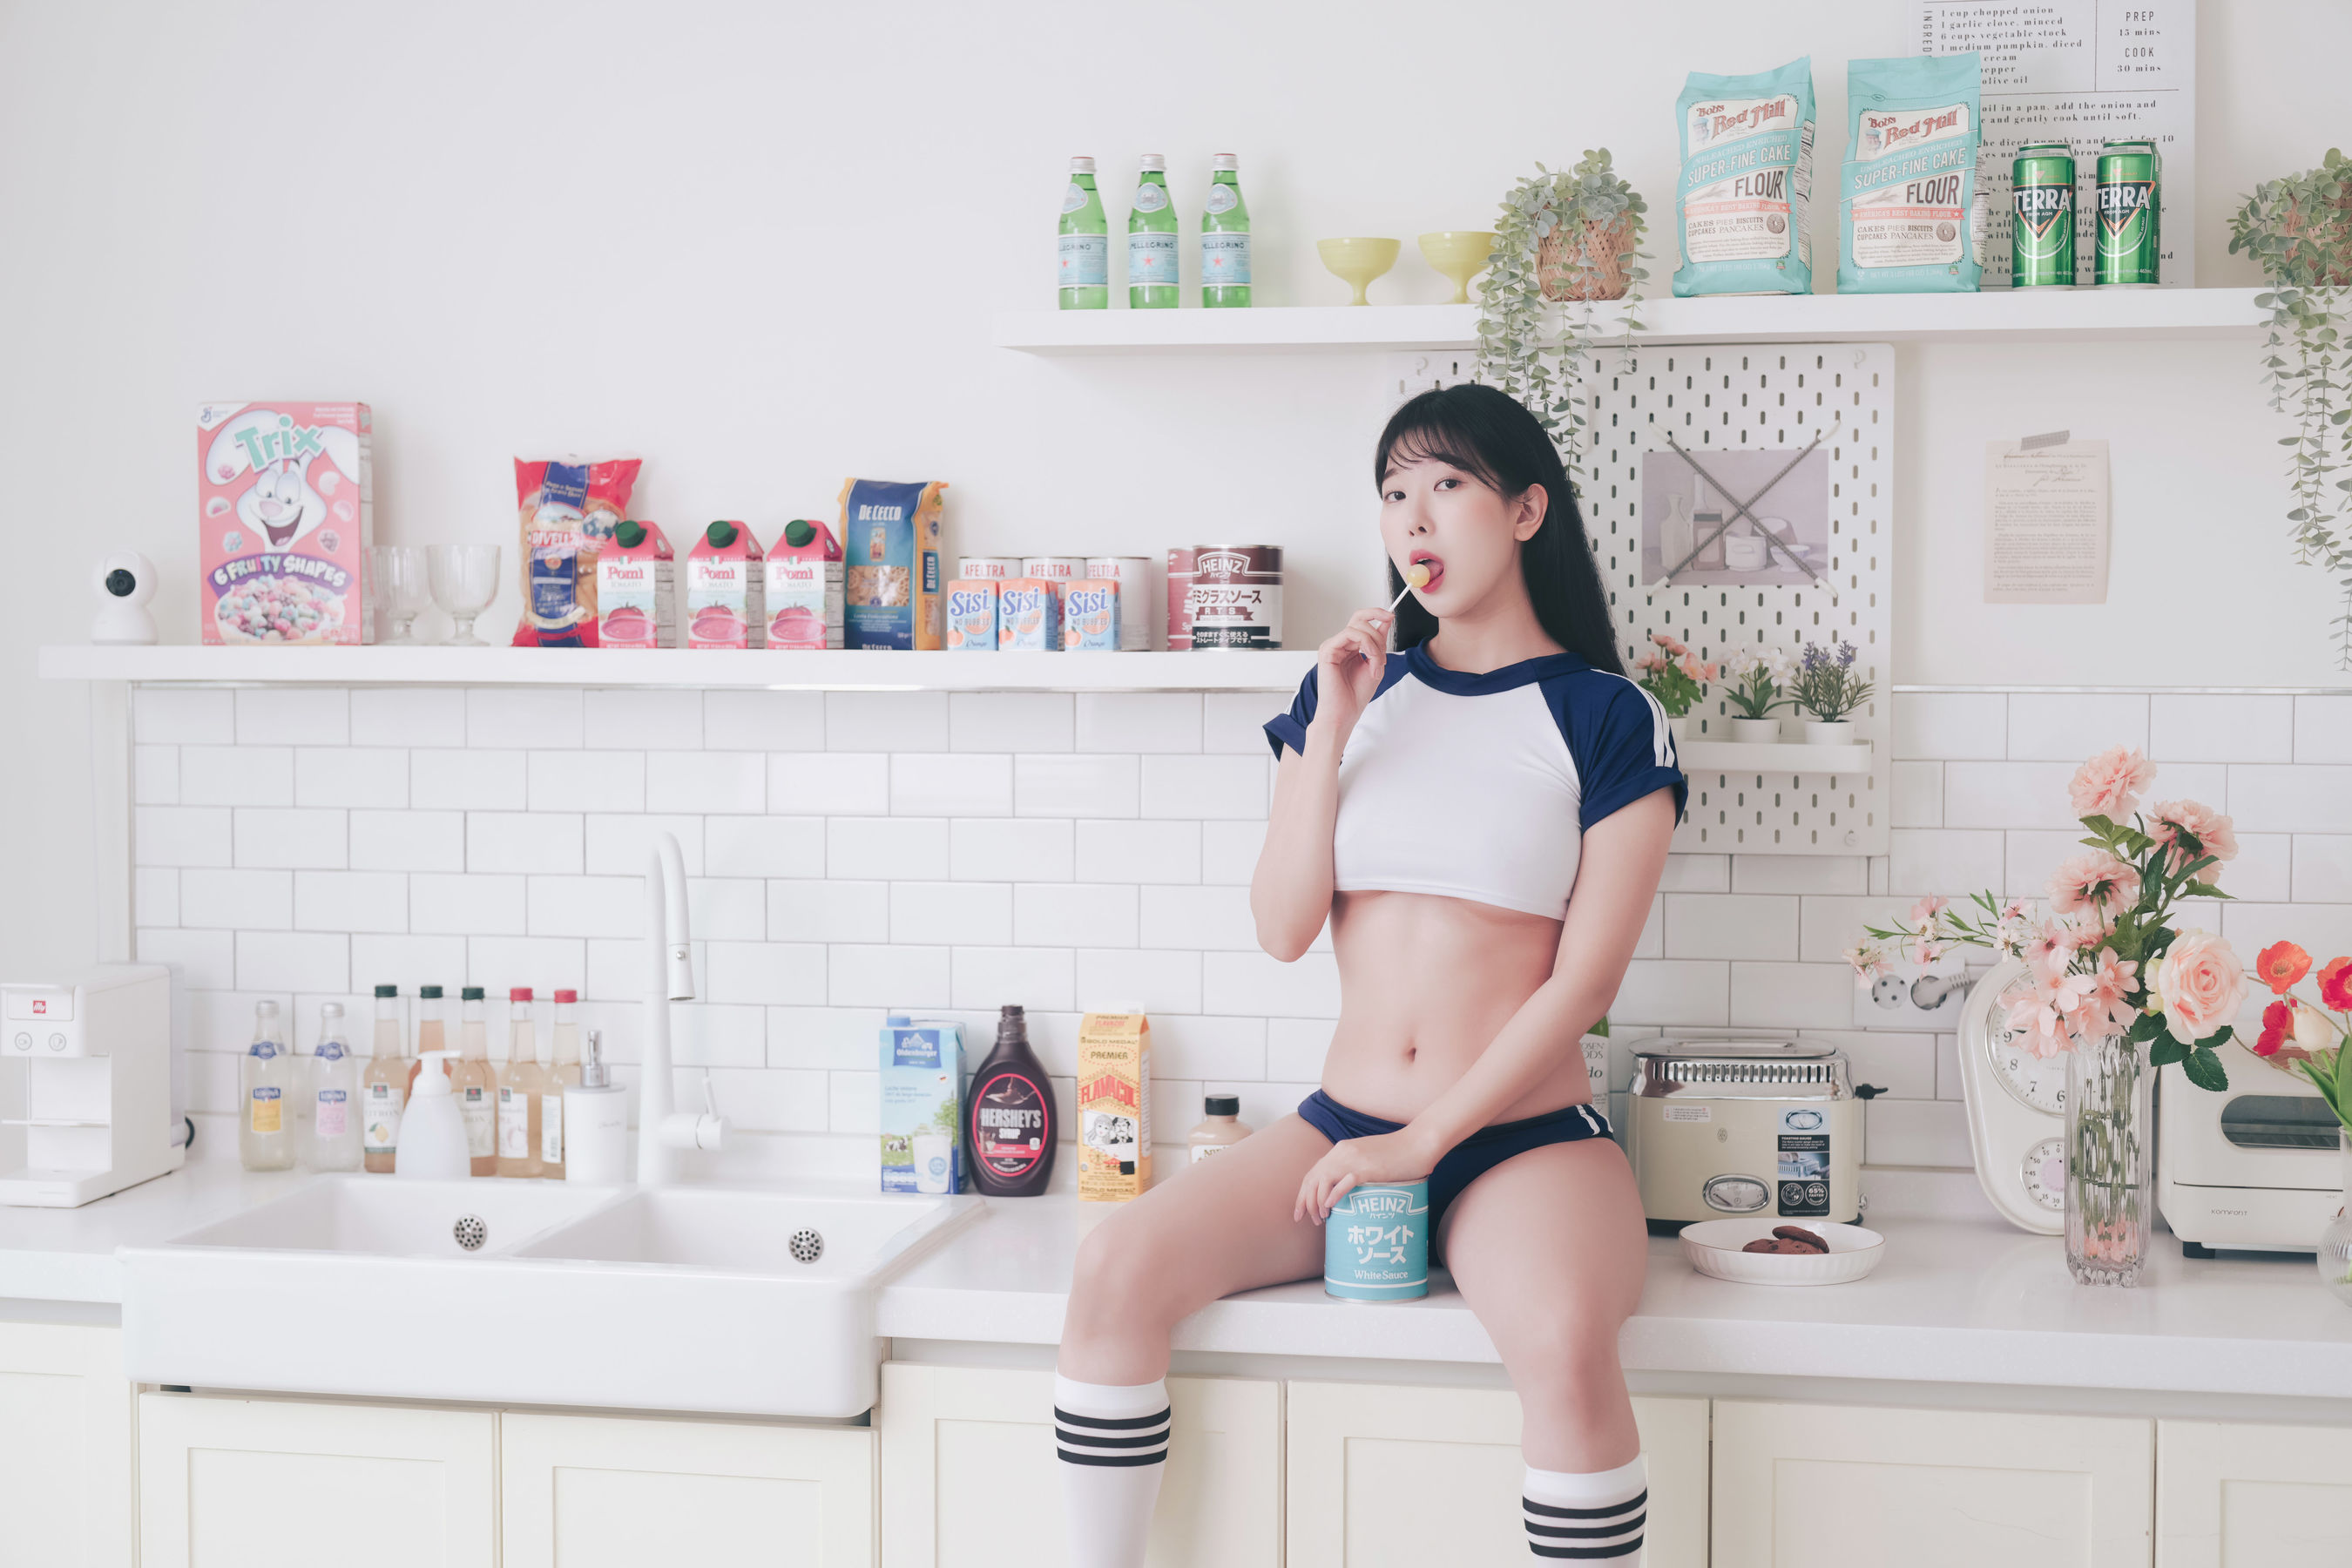 [Lilynah] Shaany - Vol.16 &amp; Bloomers  第4张